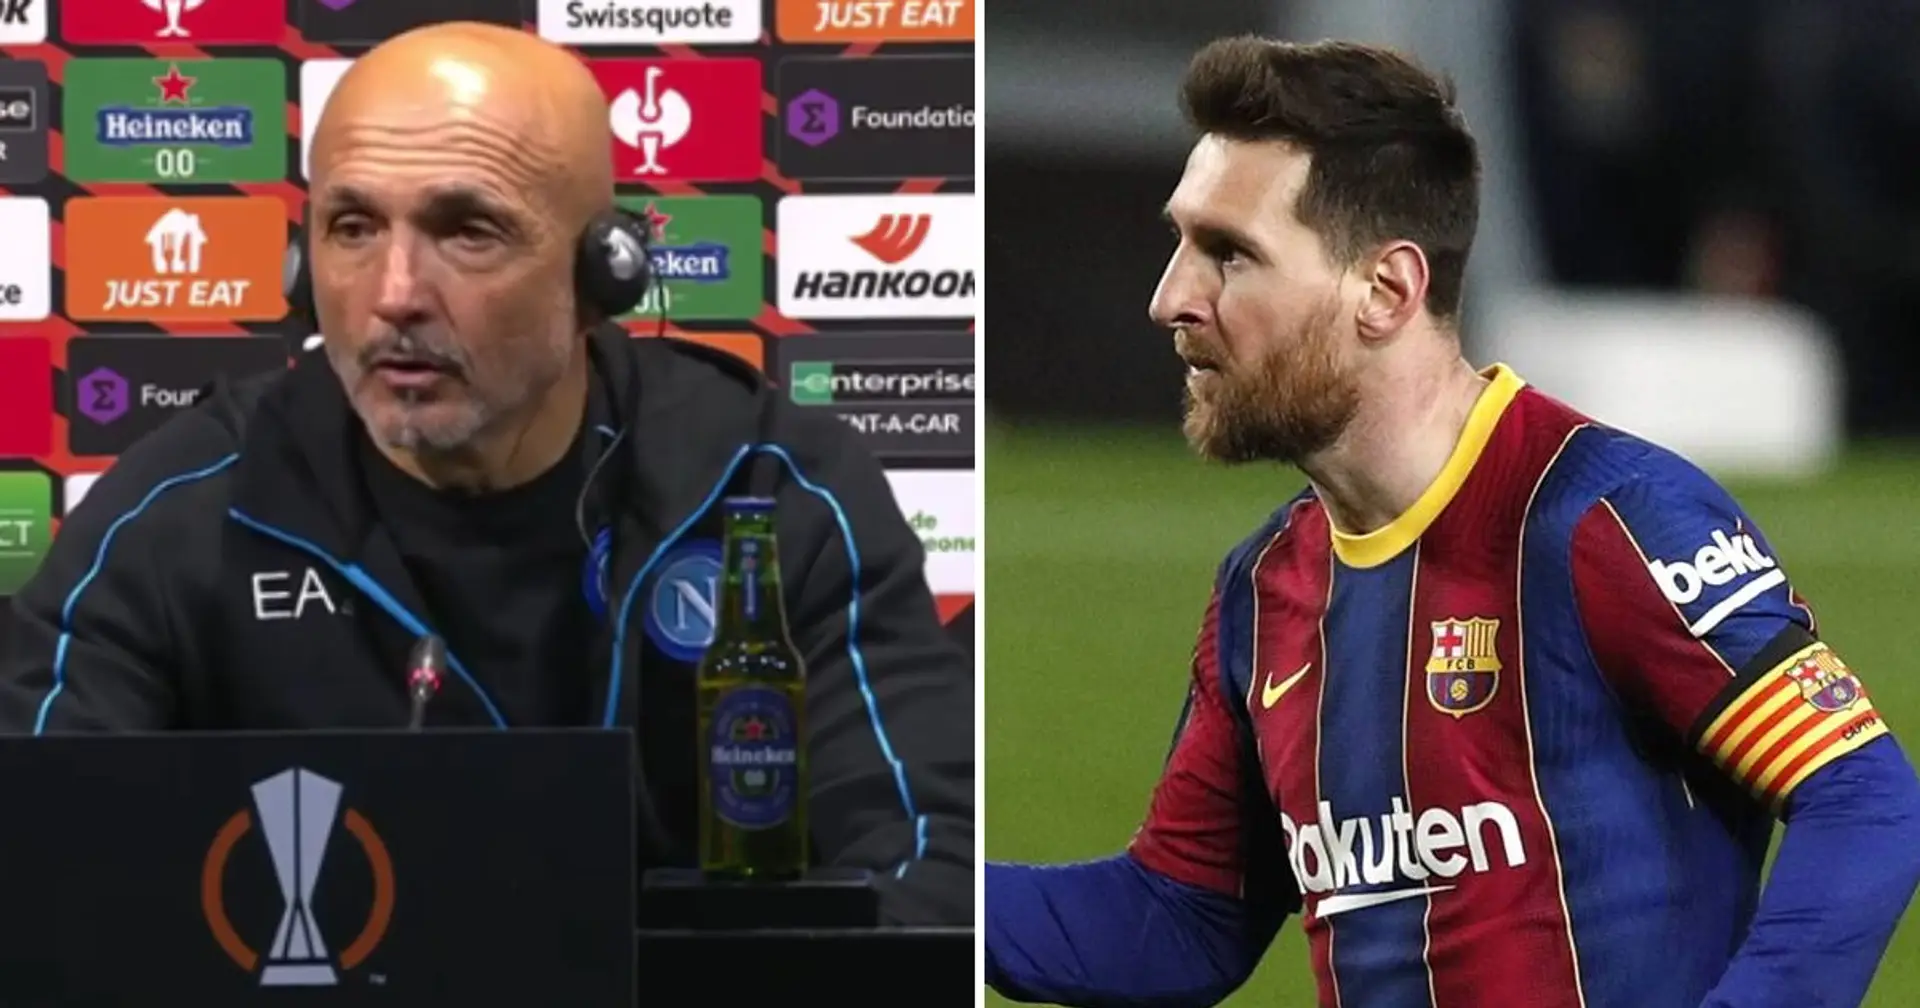 'They are still the same': Napoli coach Spaletti claims Barca are still strong without Messi